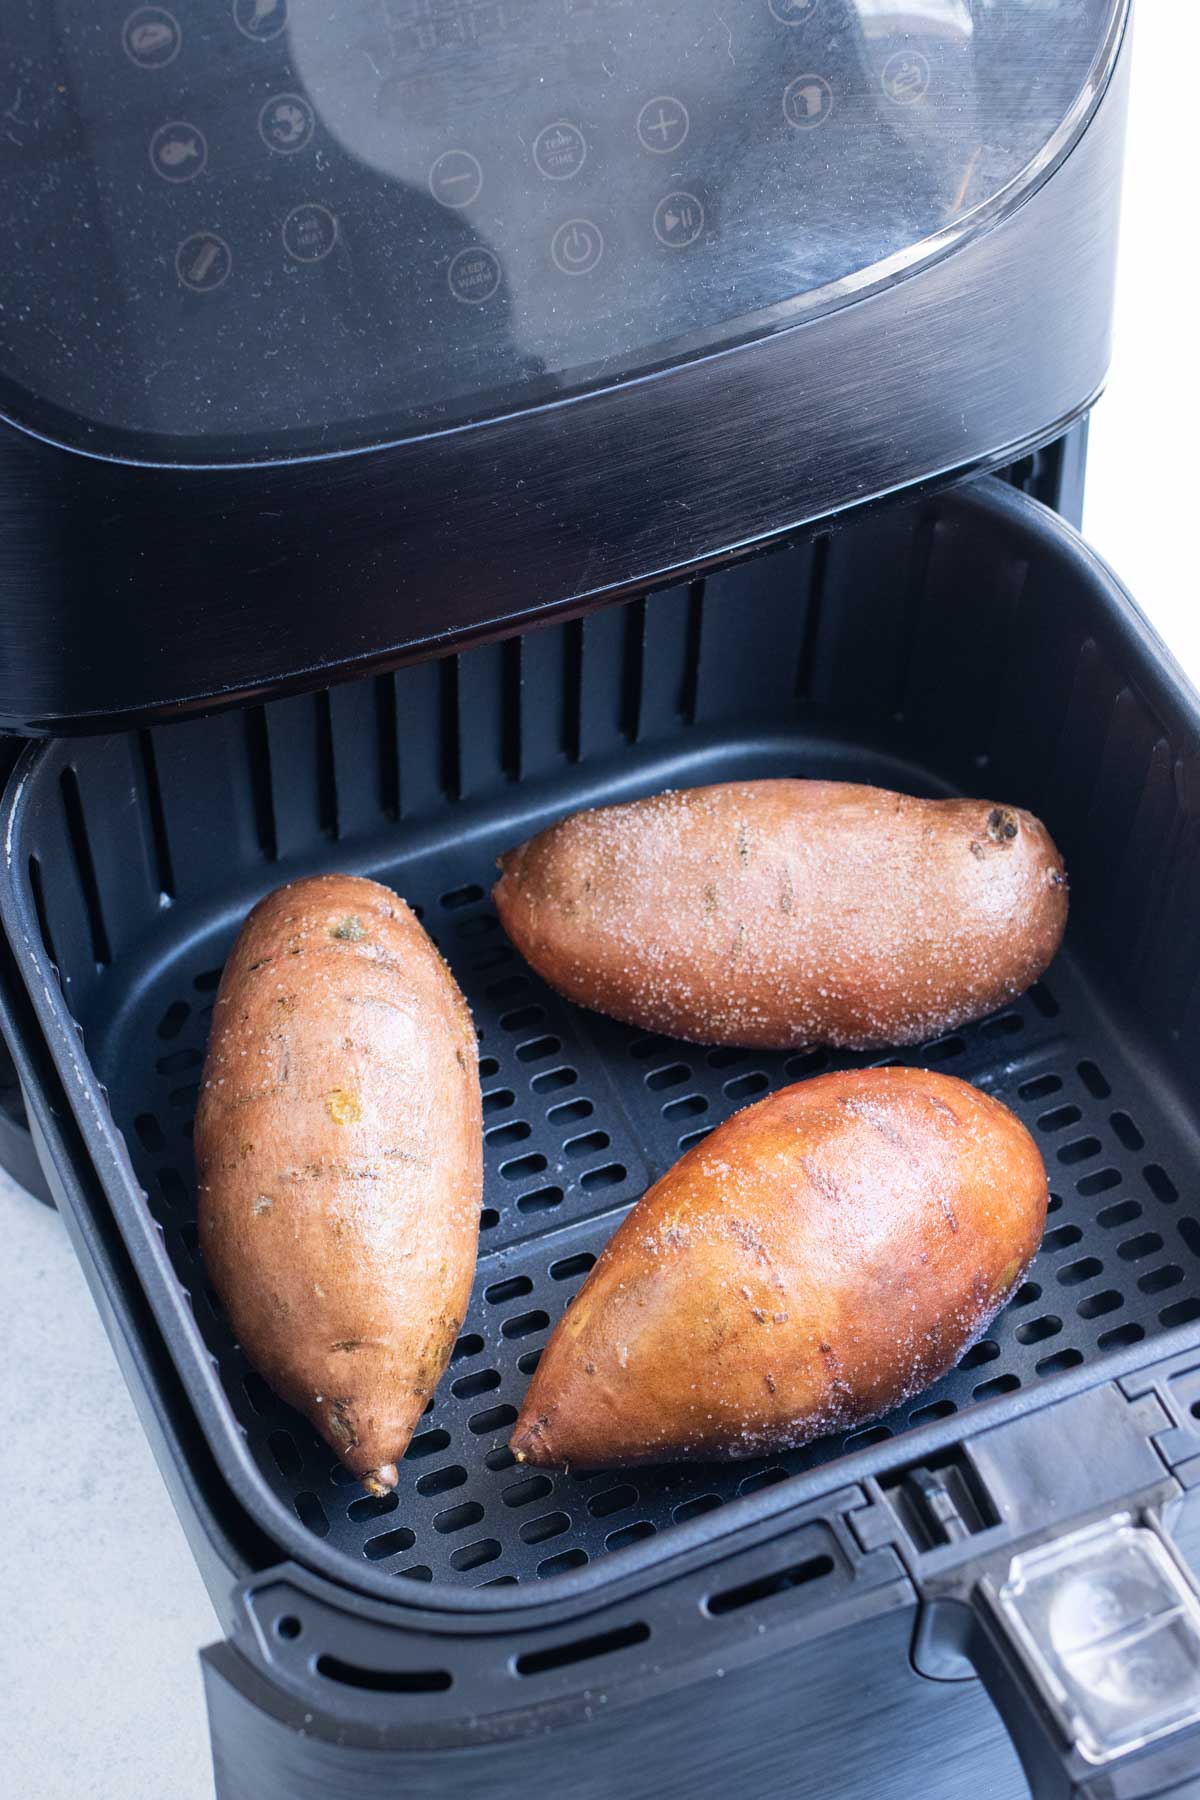 Three sweet potatoes are lined in an air fryer.